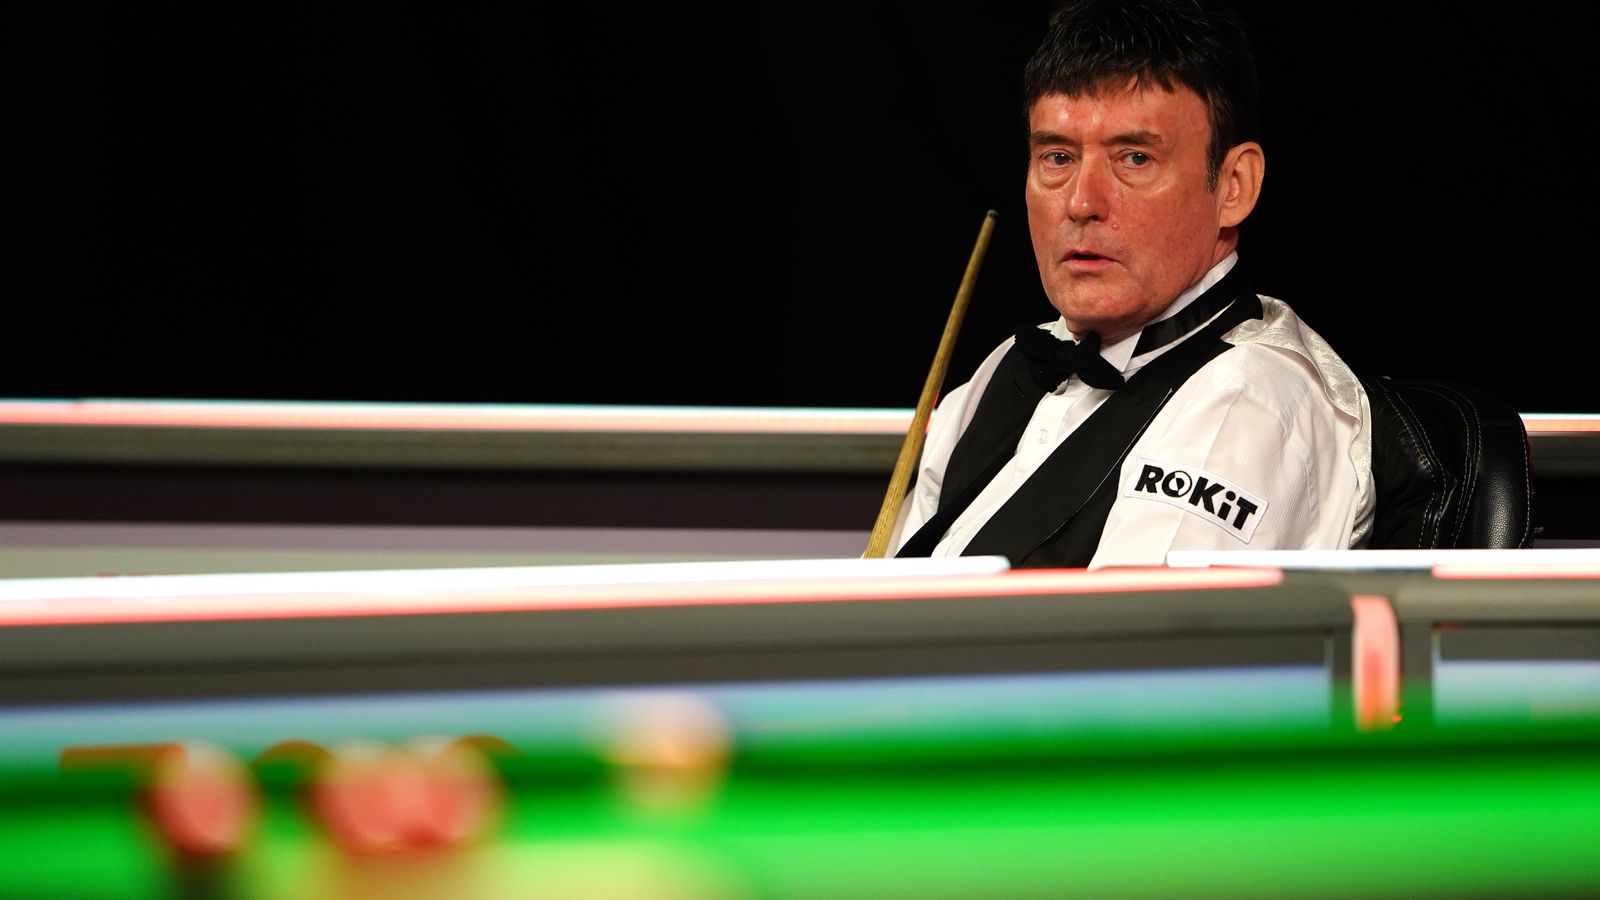 jimmy-white-warned-about-behaviour-after-referee-laughs-at-his-own-error-or-veteran-appears-to-give-official-the-middle-finger